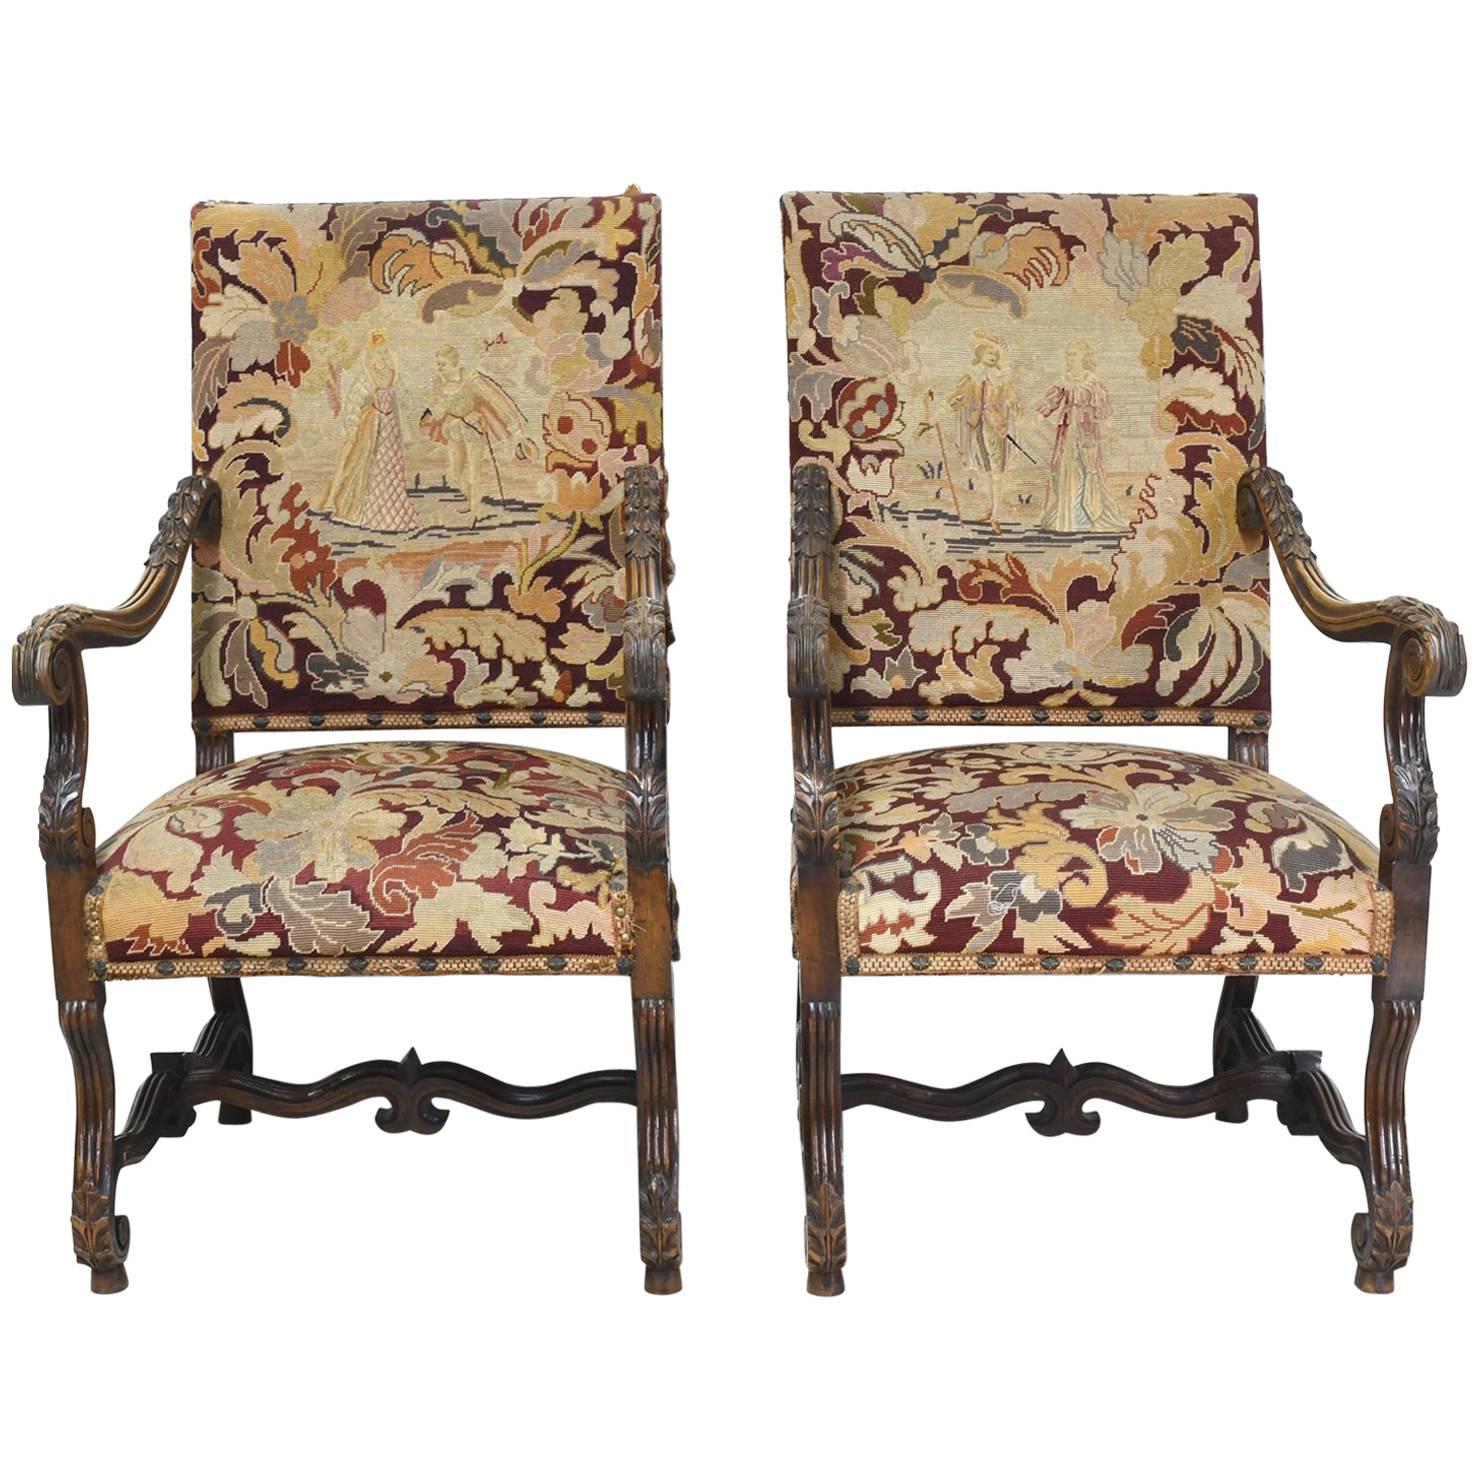 Pair of 19th Century Louis XIII Style French Throne Chairs